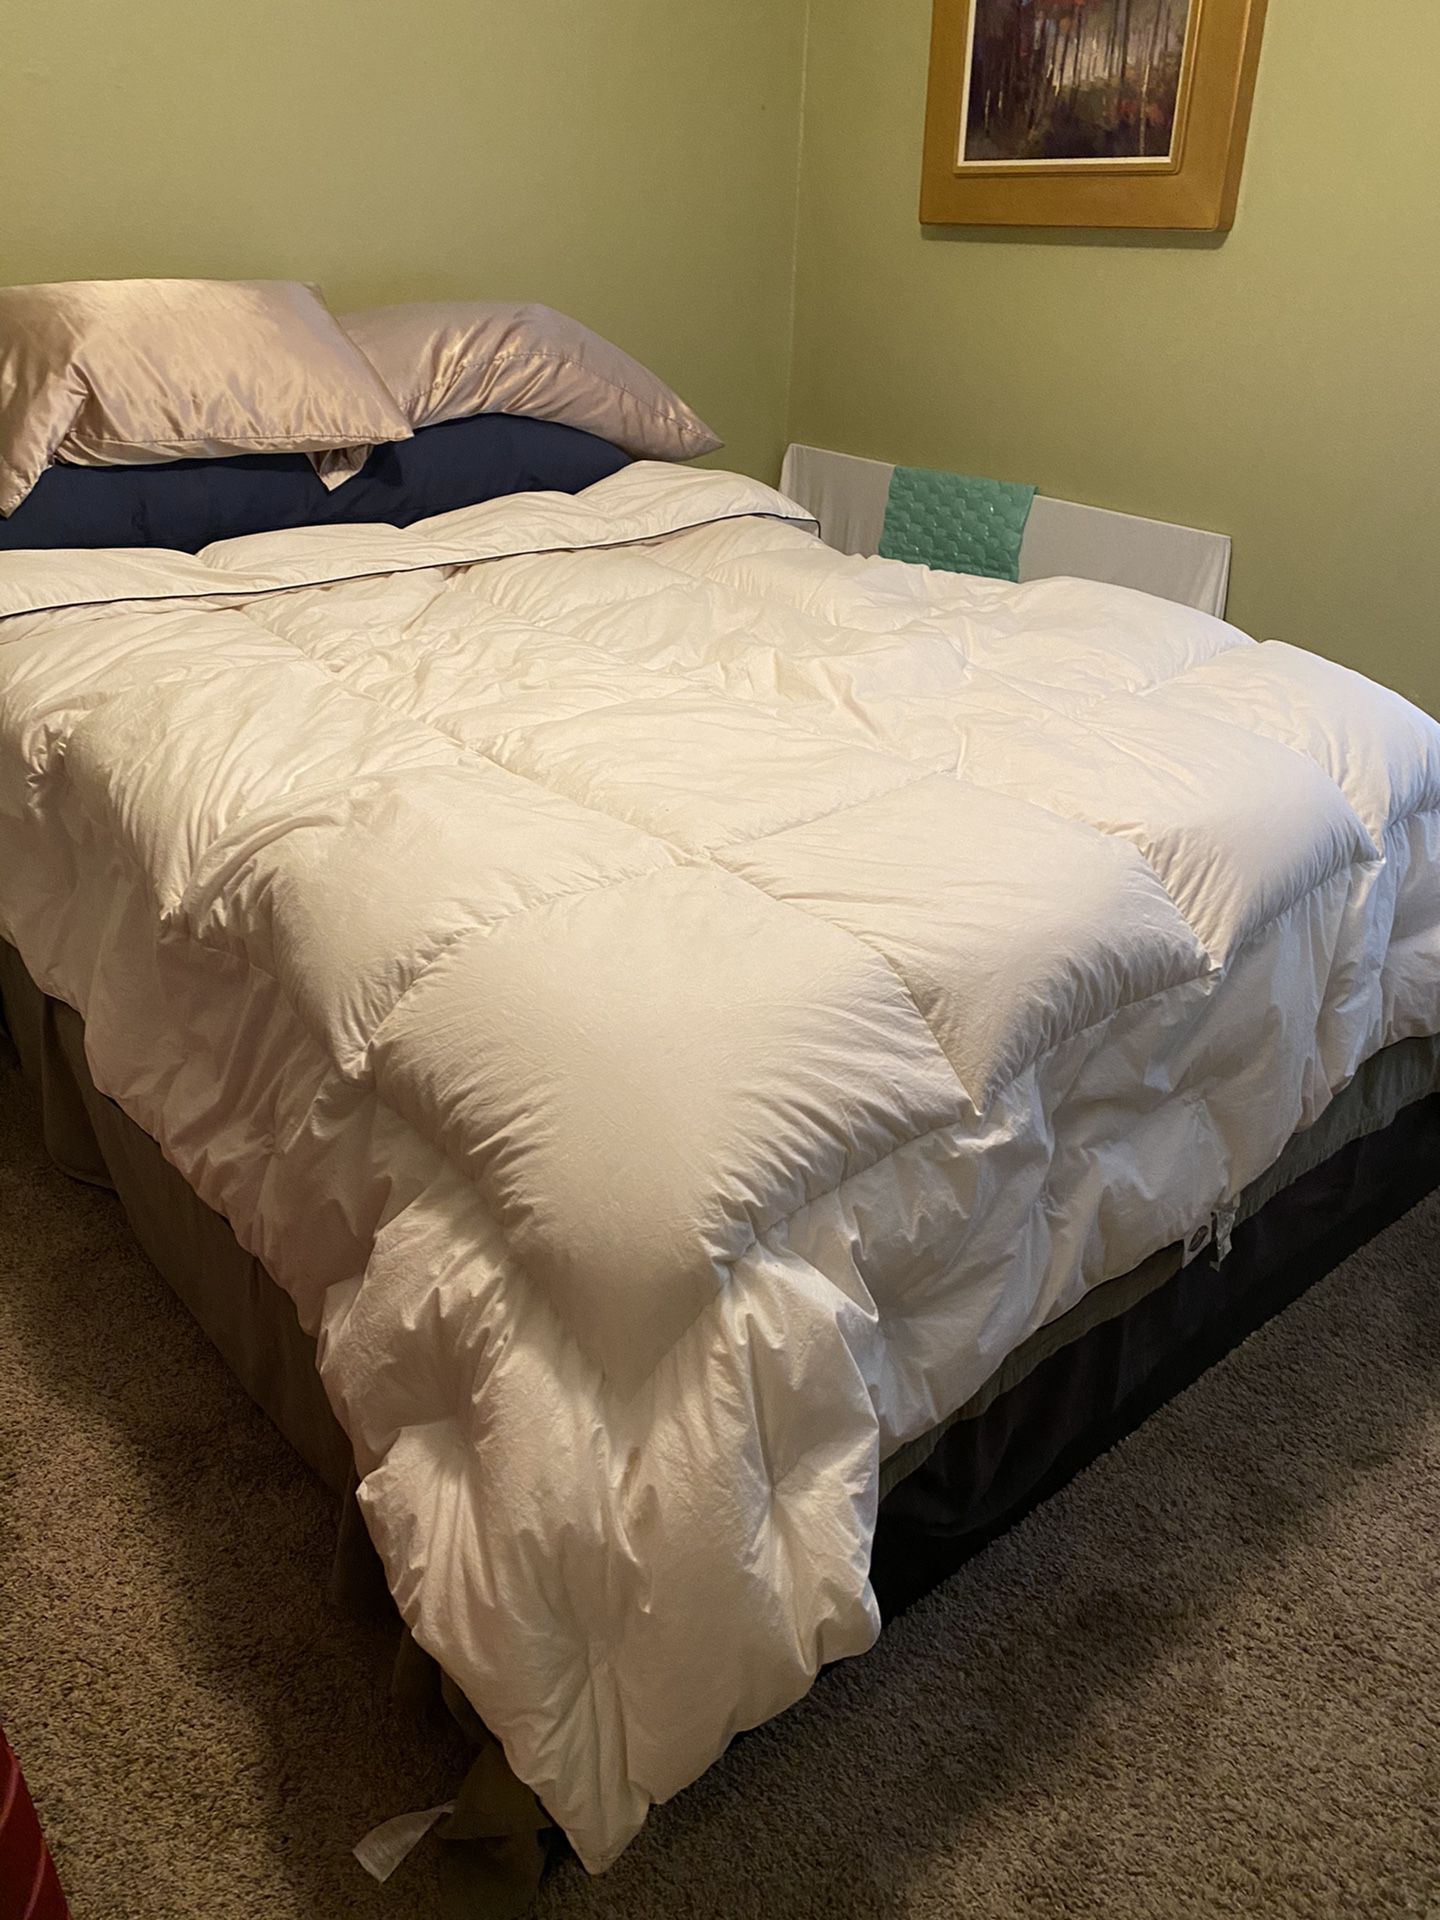 Full Sized Bed And Mattress Ikea, Gently Used